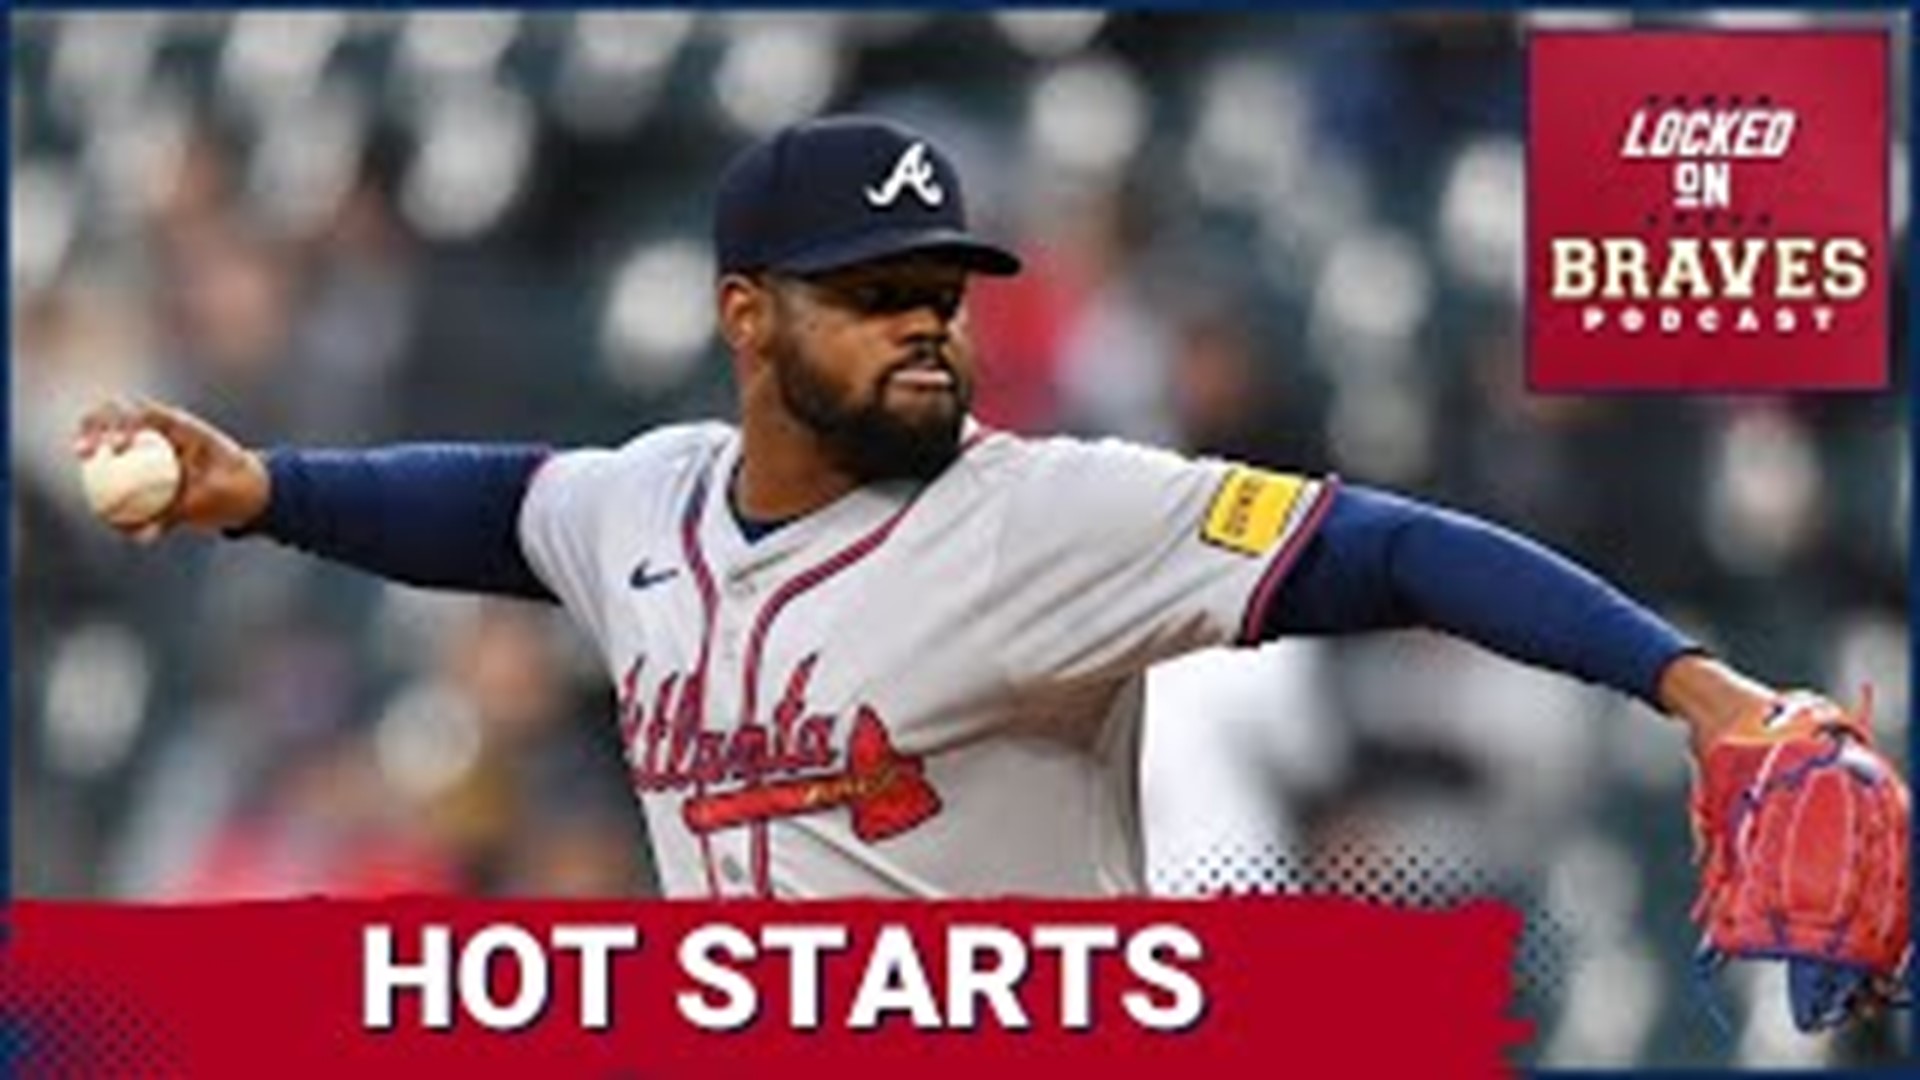 We take a look at Reynaldo López’ great start from Tuesday as the Atlanta Braves beat the New York Mets 6-5.